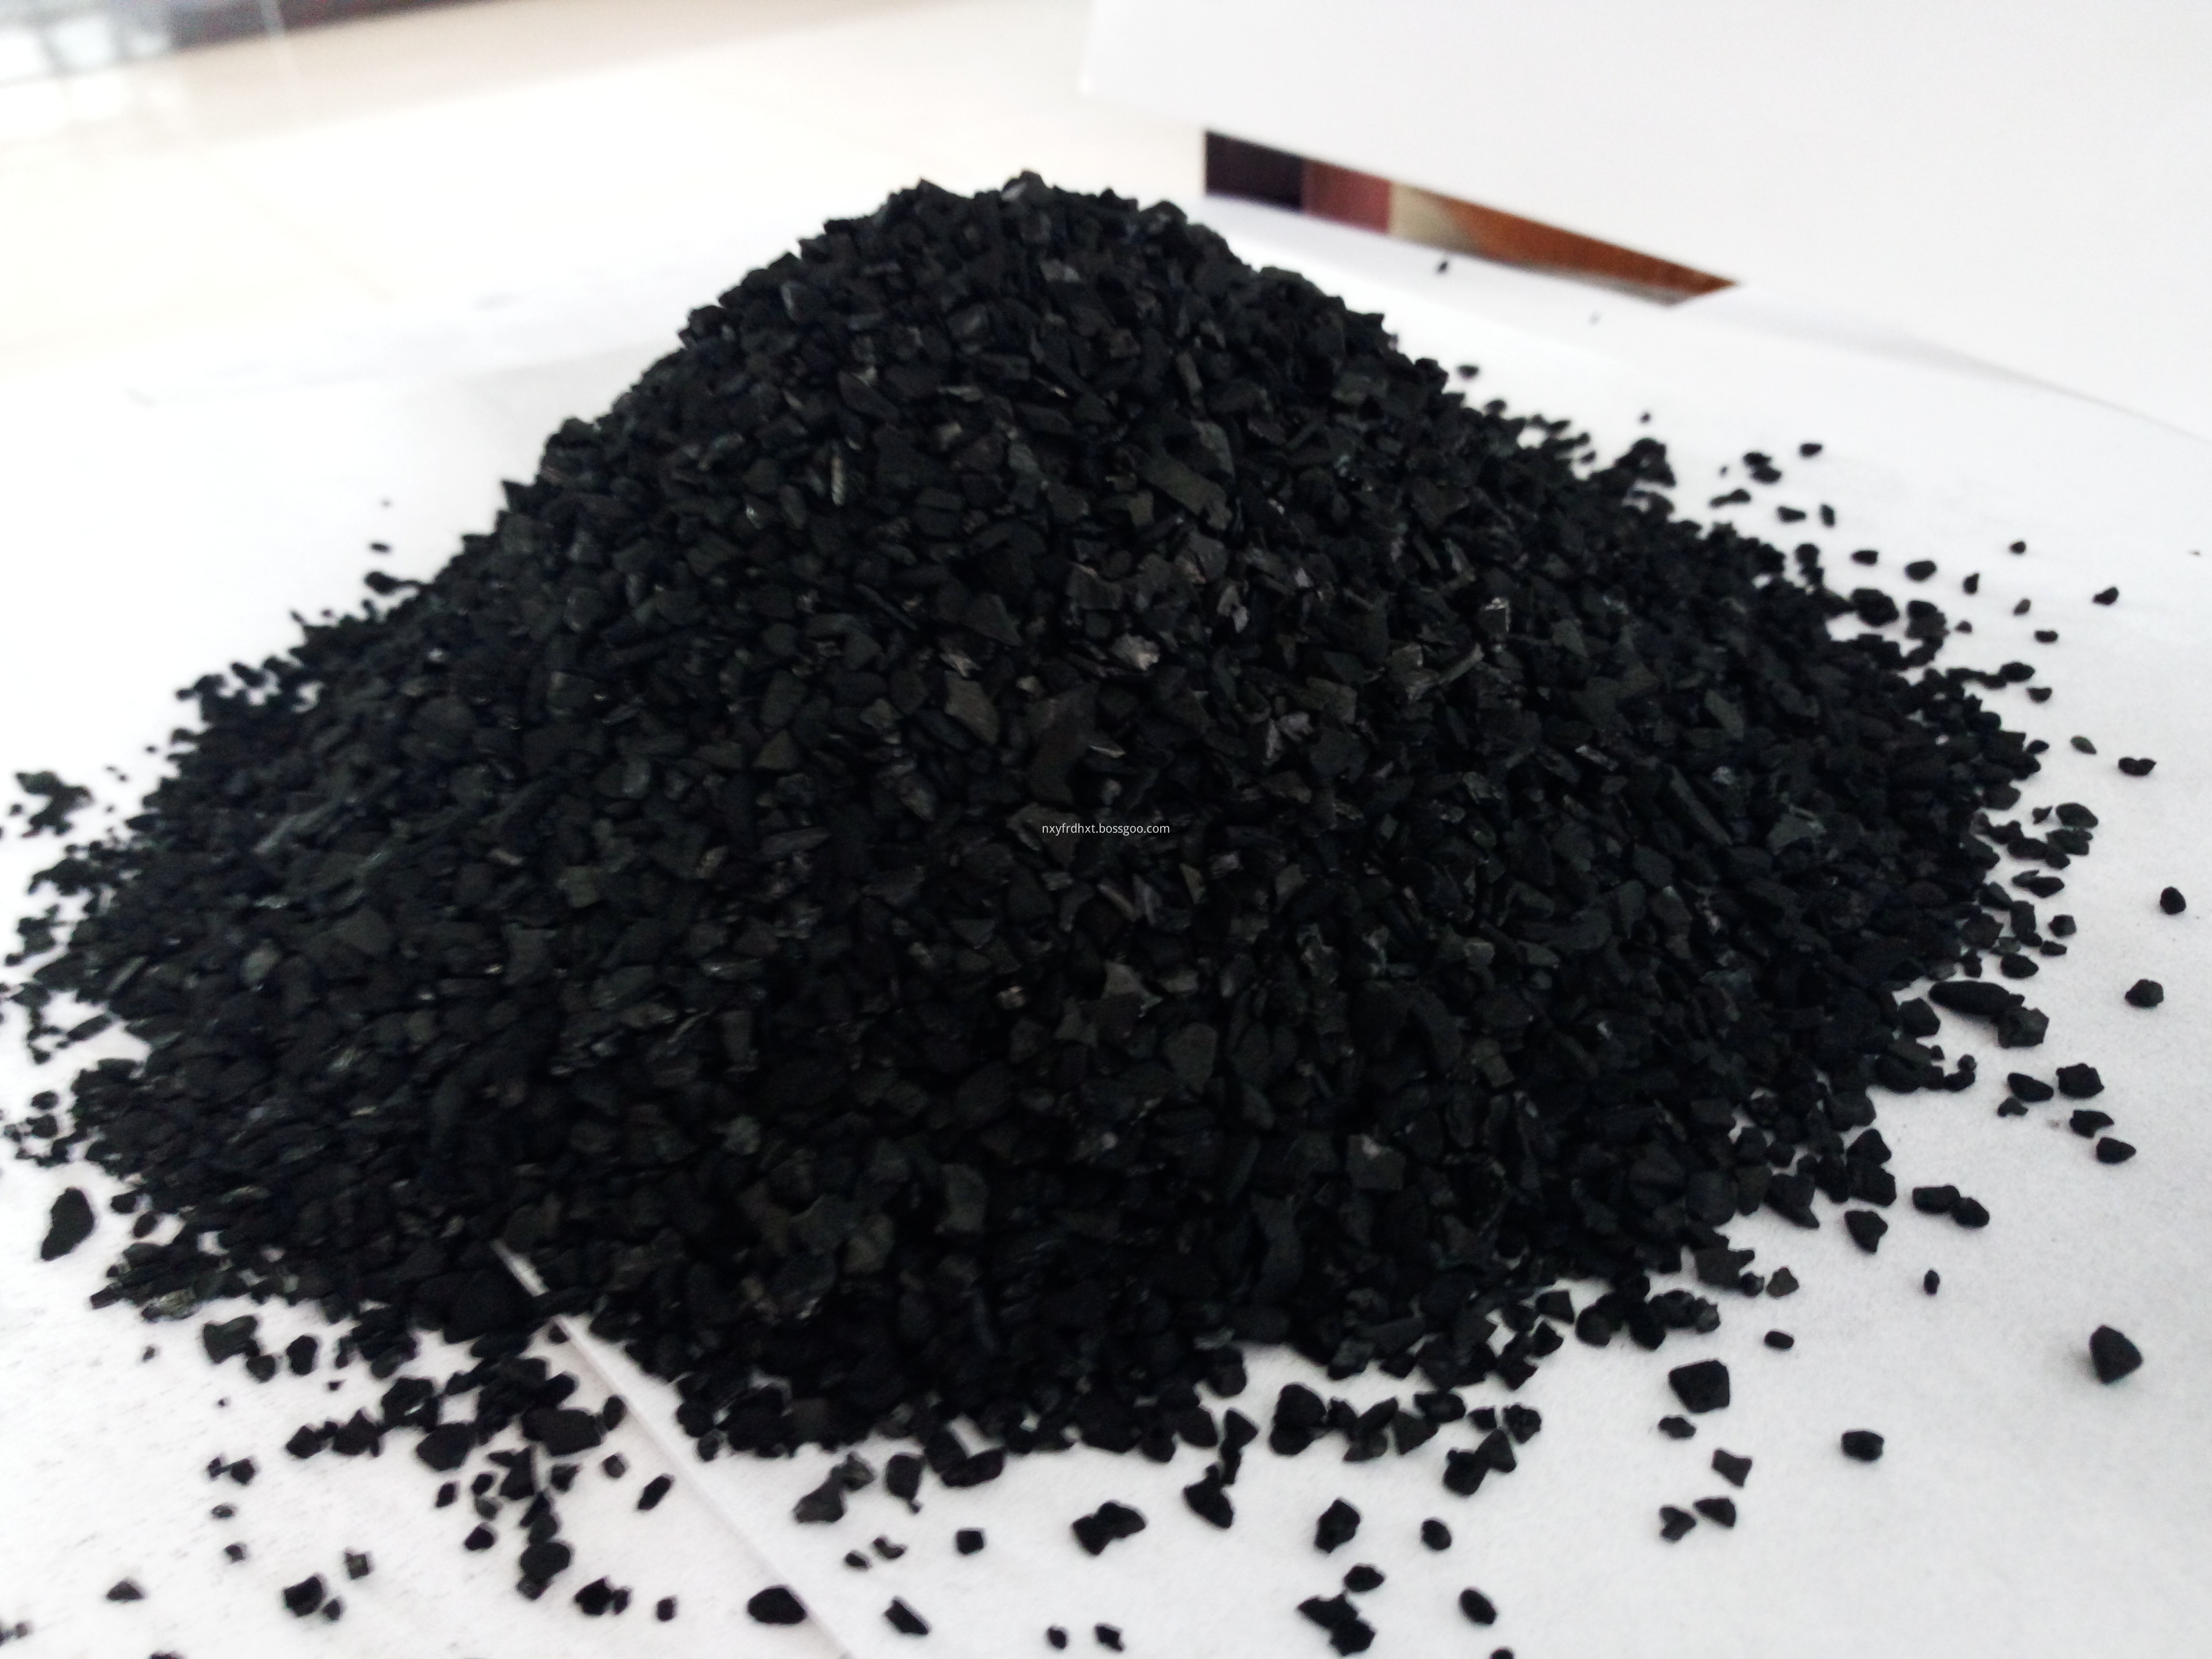 Granular activated carbon